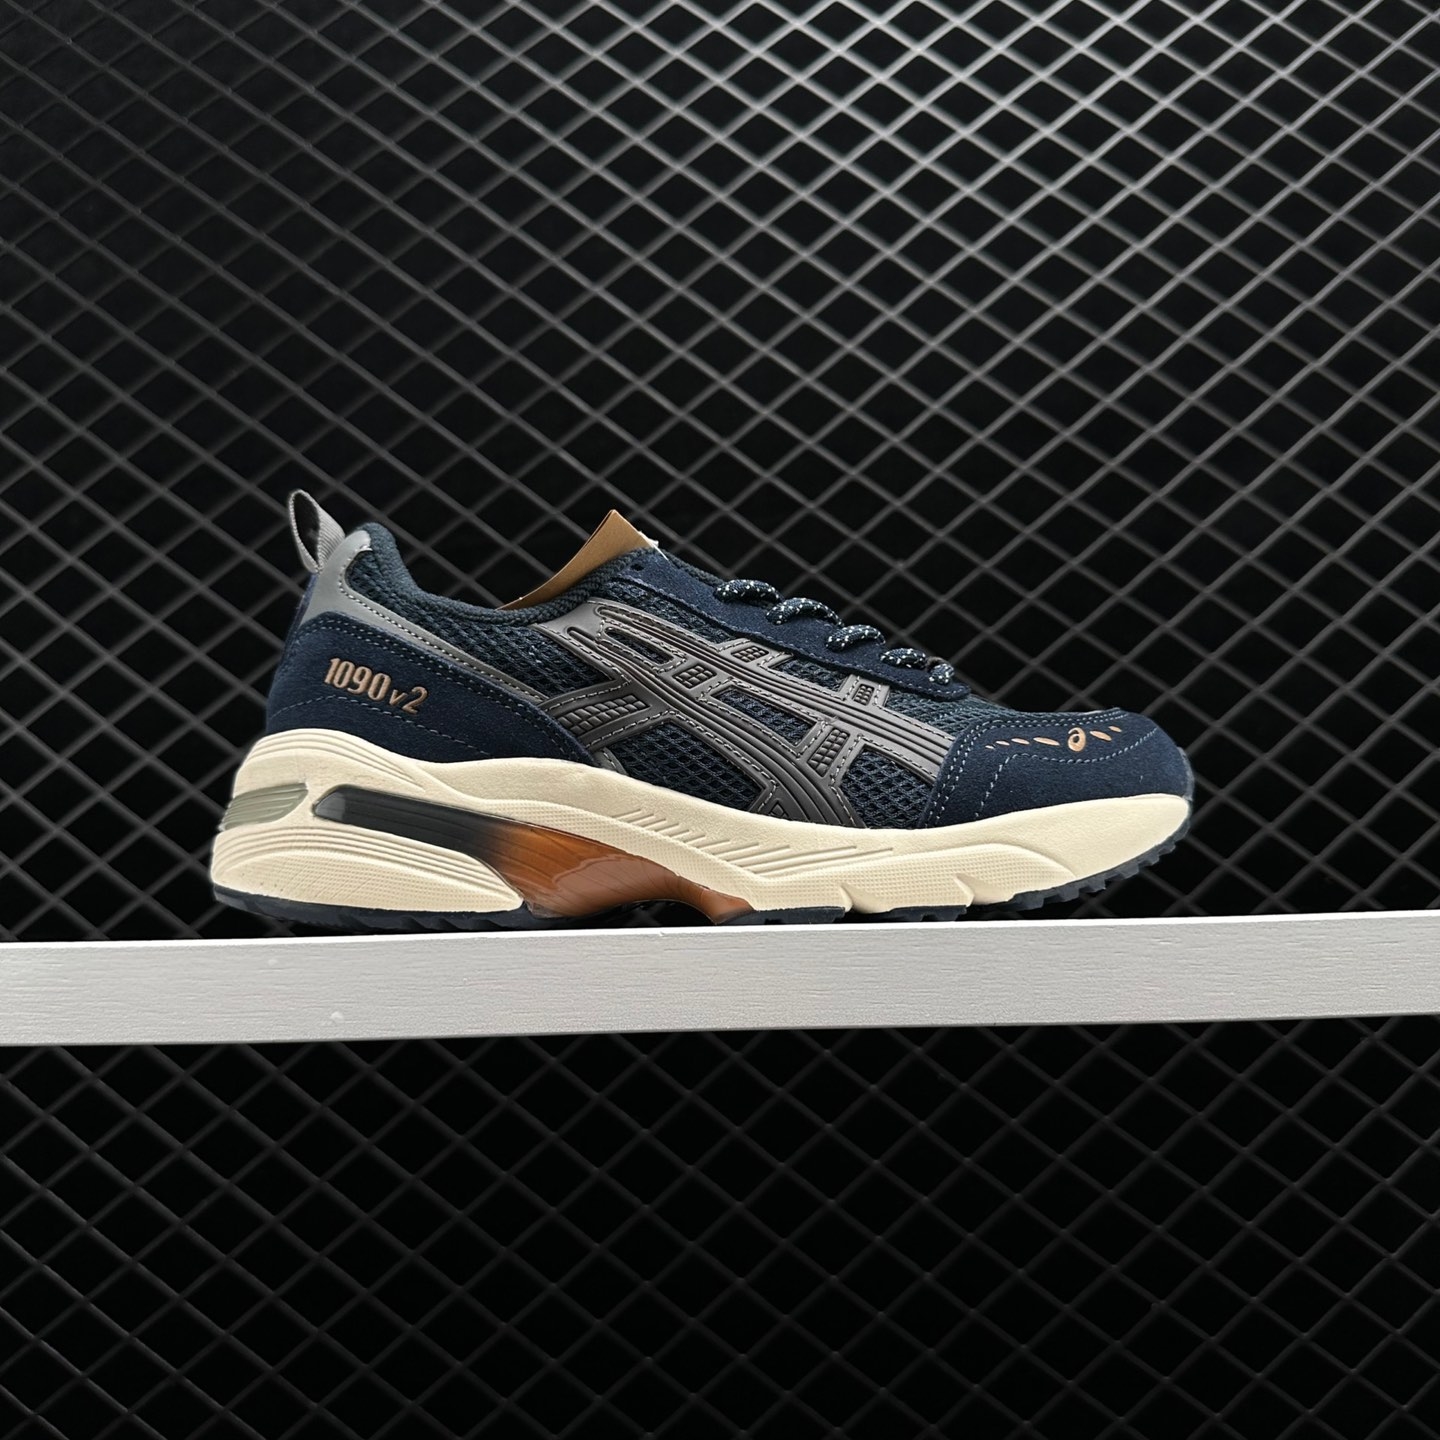 Asics Gel 1090 V2 'French Blue' 1203A224-400 - Shop the Latest Model Now